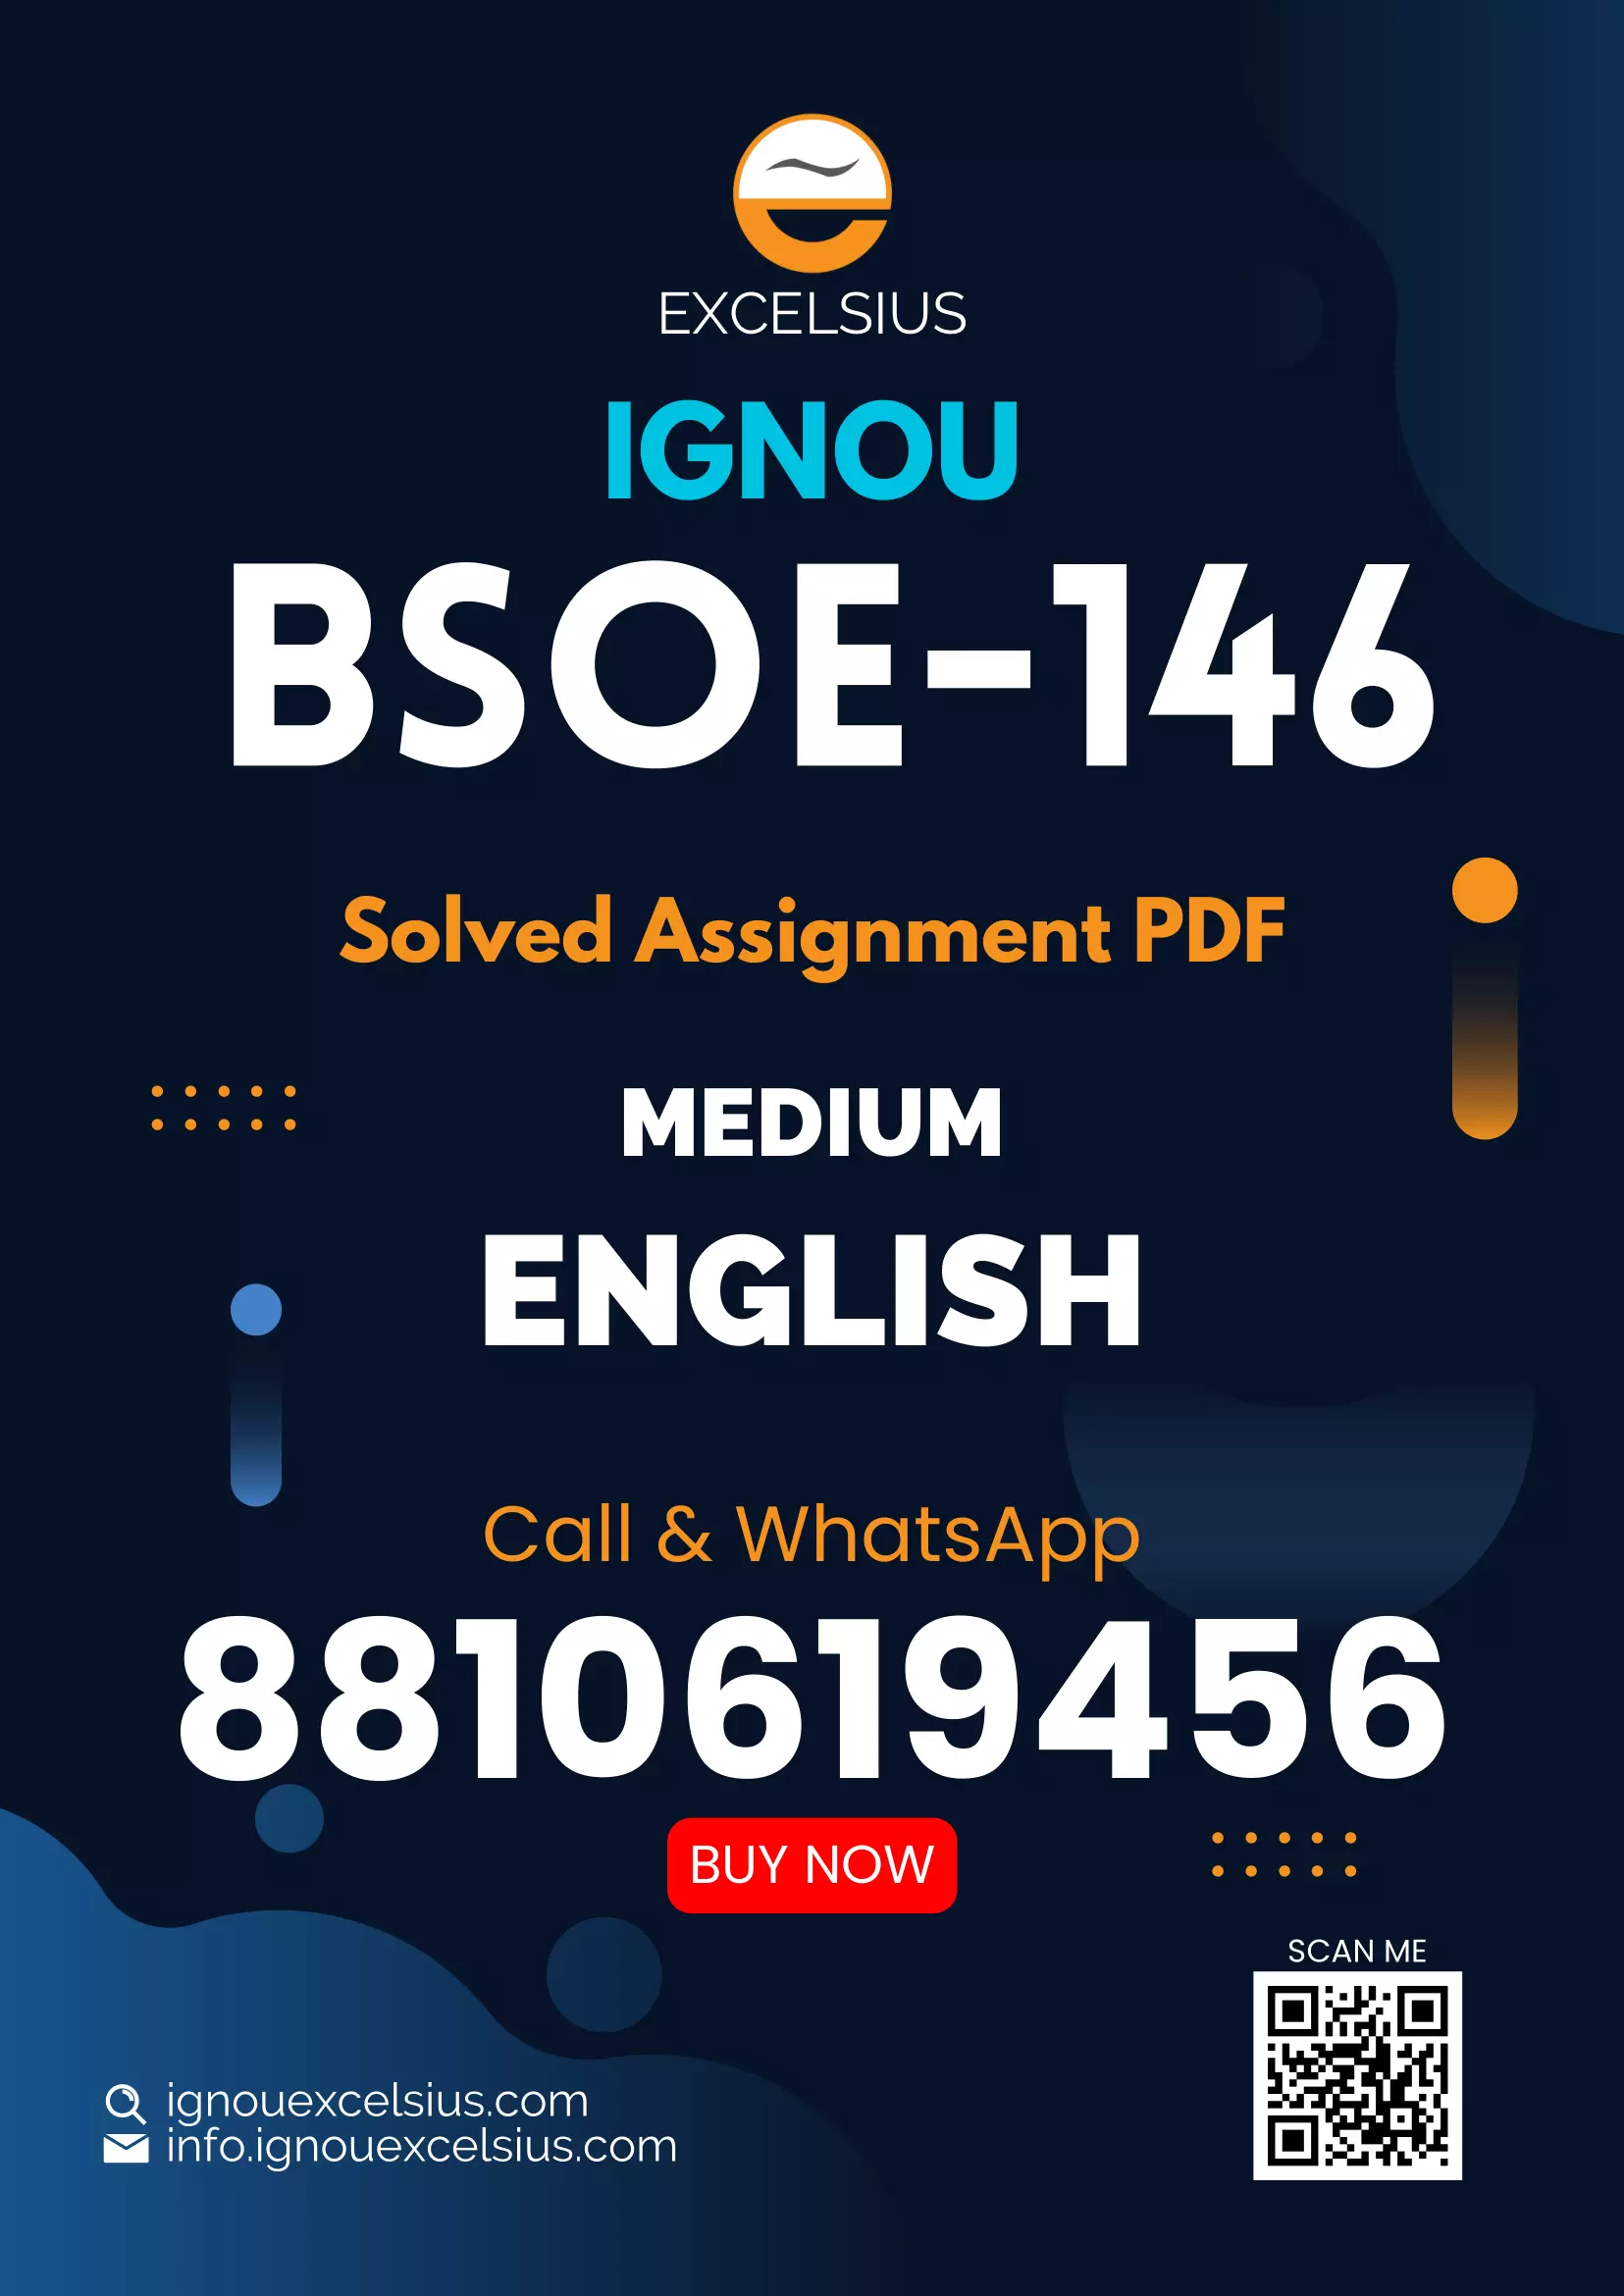 IGNOU BSOE-146 - Marriage, Family and Kinship, Latest Solved Assignment-July 2022 – January 2023